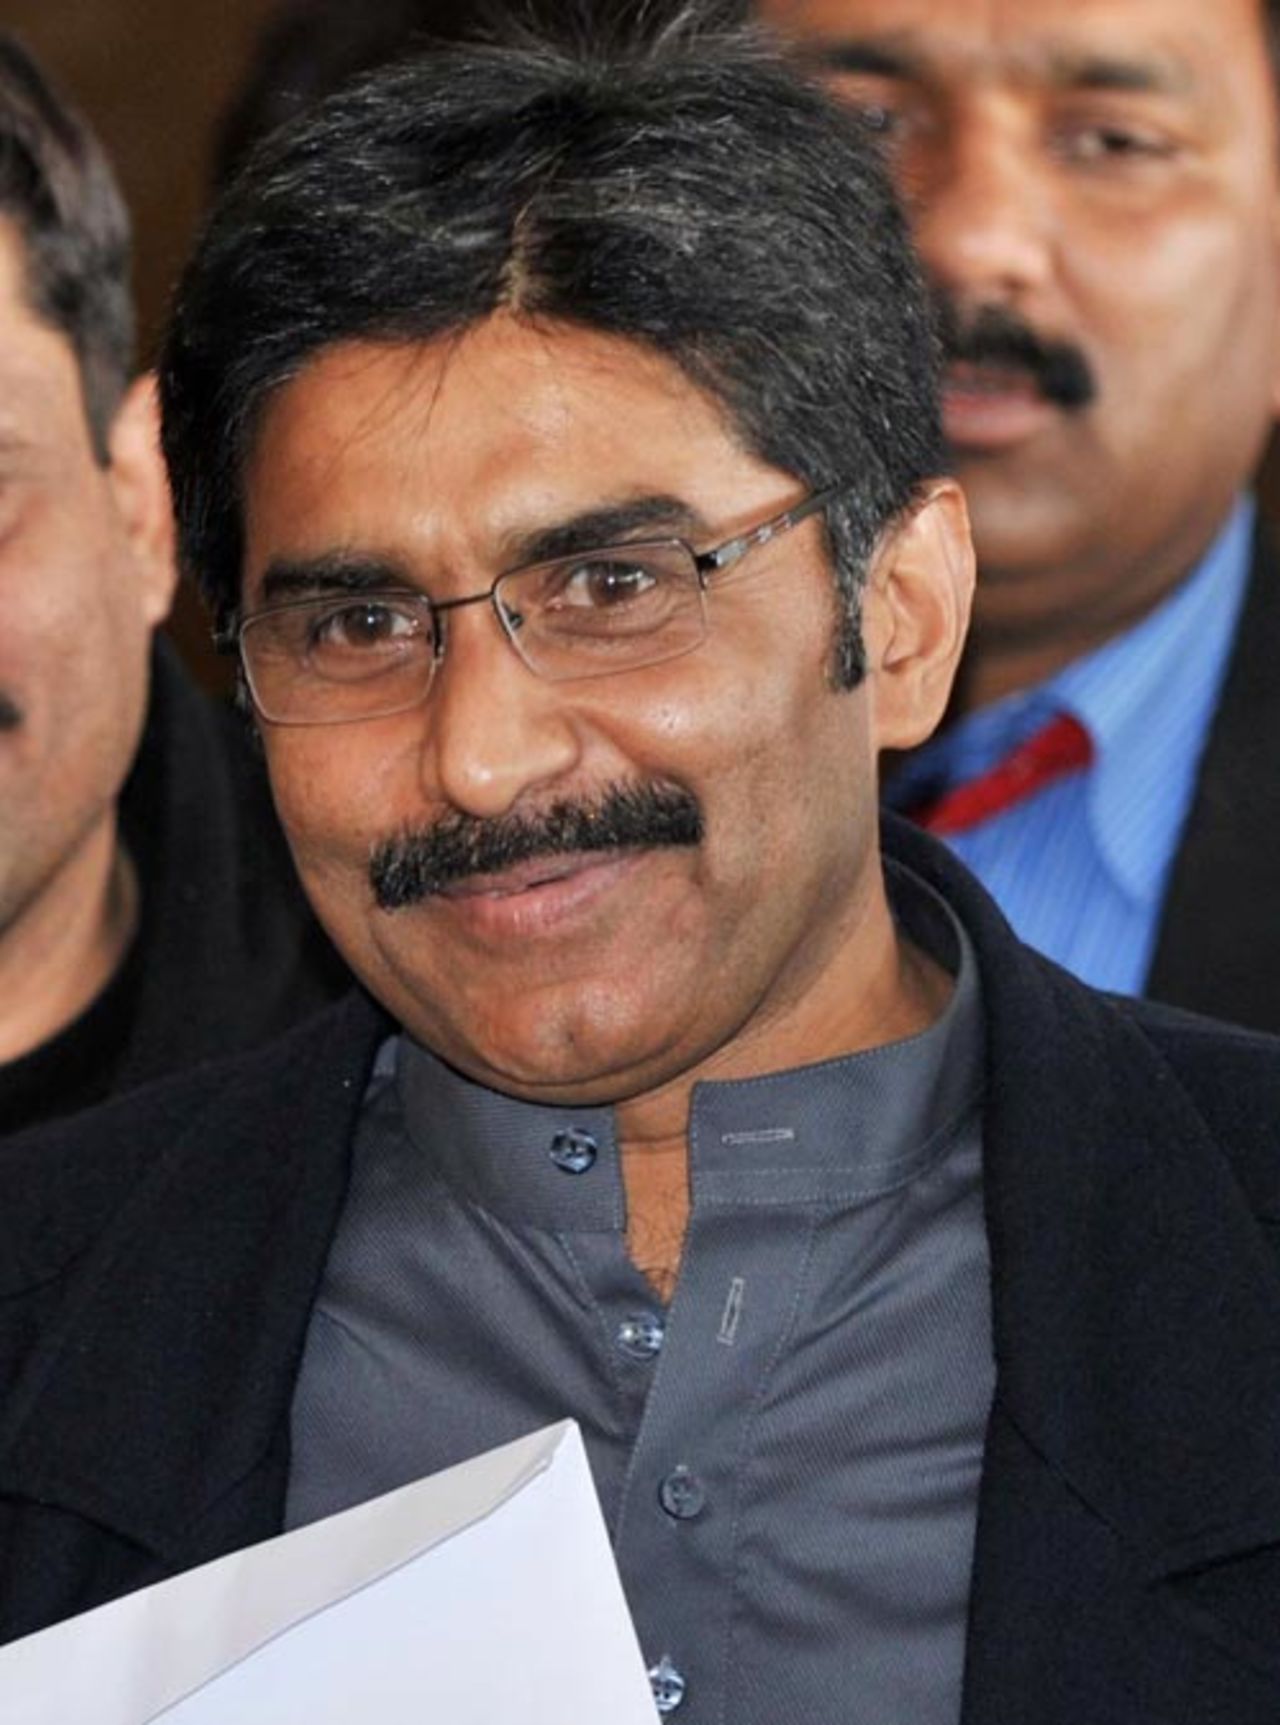 Javed Miandad adresses the media after stepping down as director-general of the PCB, Lahore, January 28, 2008